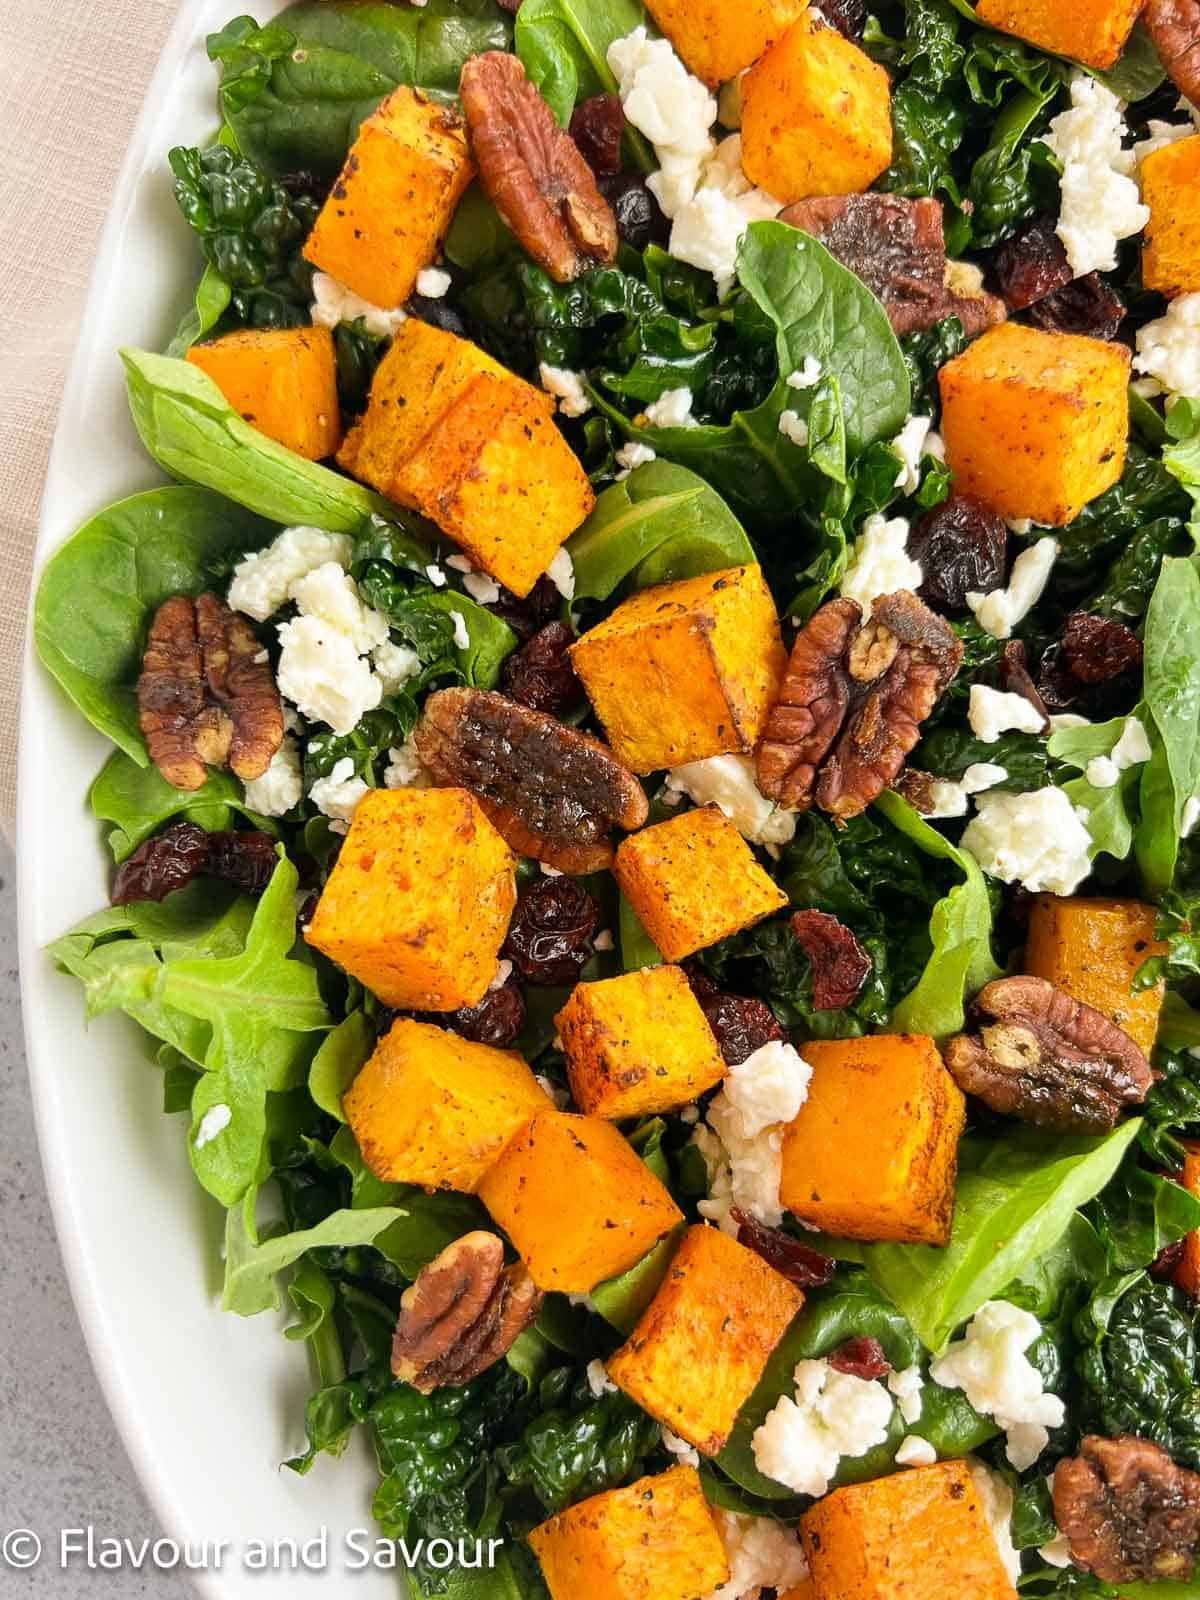 Plate of salad with squash, sweet cranberries, feta cheese crumbles, and crunchy pecans top a bed of baby spinach and tenderized kale